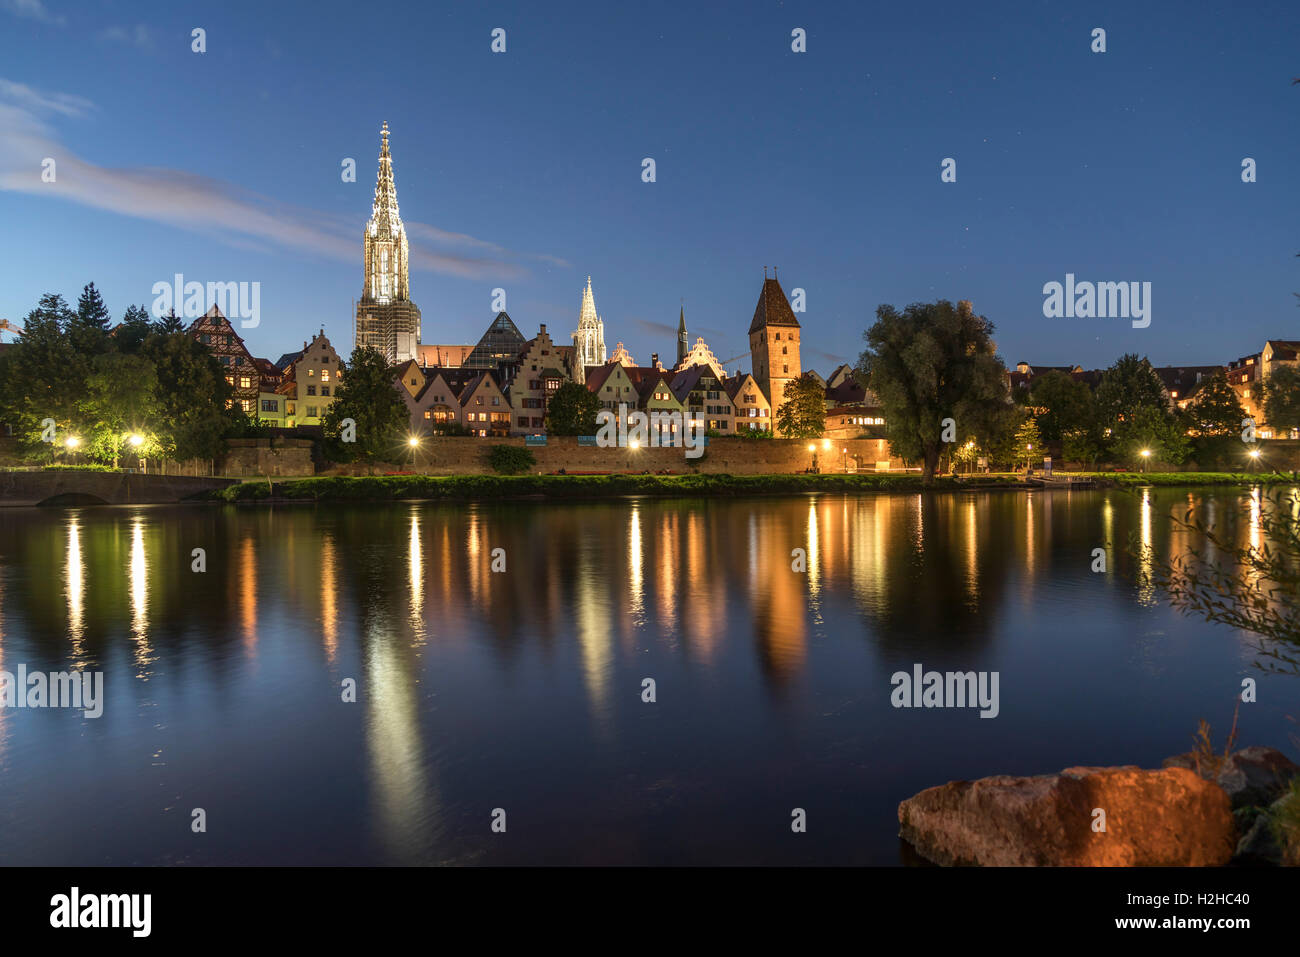 cityscape with danube river and the Ulm Minster at dusk, Ulm, Baden-Württemberg, Germany, Europe Stock Photo